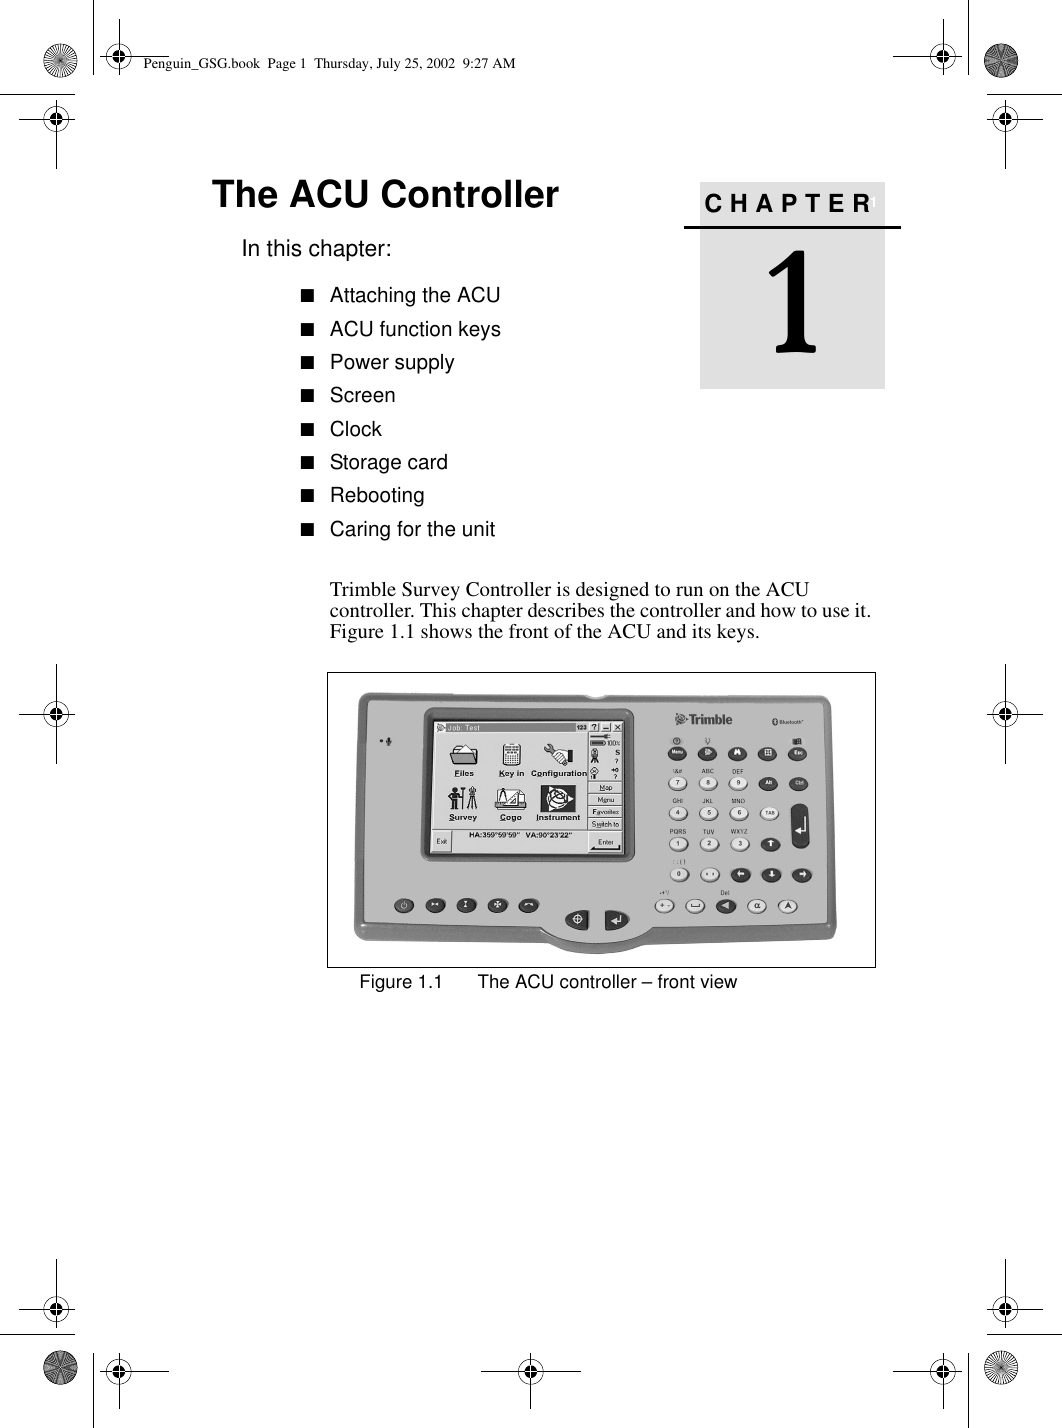 CHAPTER1The ACU Controller 1In this chapter:■Attaching the ACU■ACU function keys■Power supply■Screen■Clock■Storage card■Rebooting■Caring for the unitTrimble Survey Controller is designed to run on the ACU controller. This chapter describes the controller and how to use it. Figure 1.1 shows the front of the ACU and its keys.Figure 1.1 The ACU controller – front view Penguin_GSG.book  Page 1  Thursday, July 25, 2002  9:27 AM